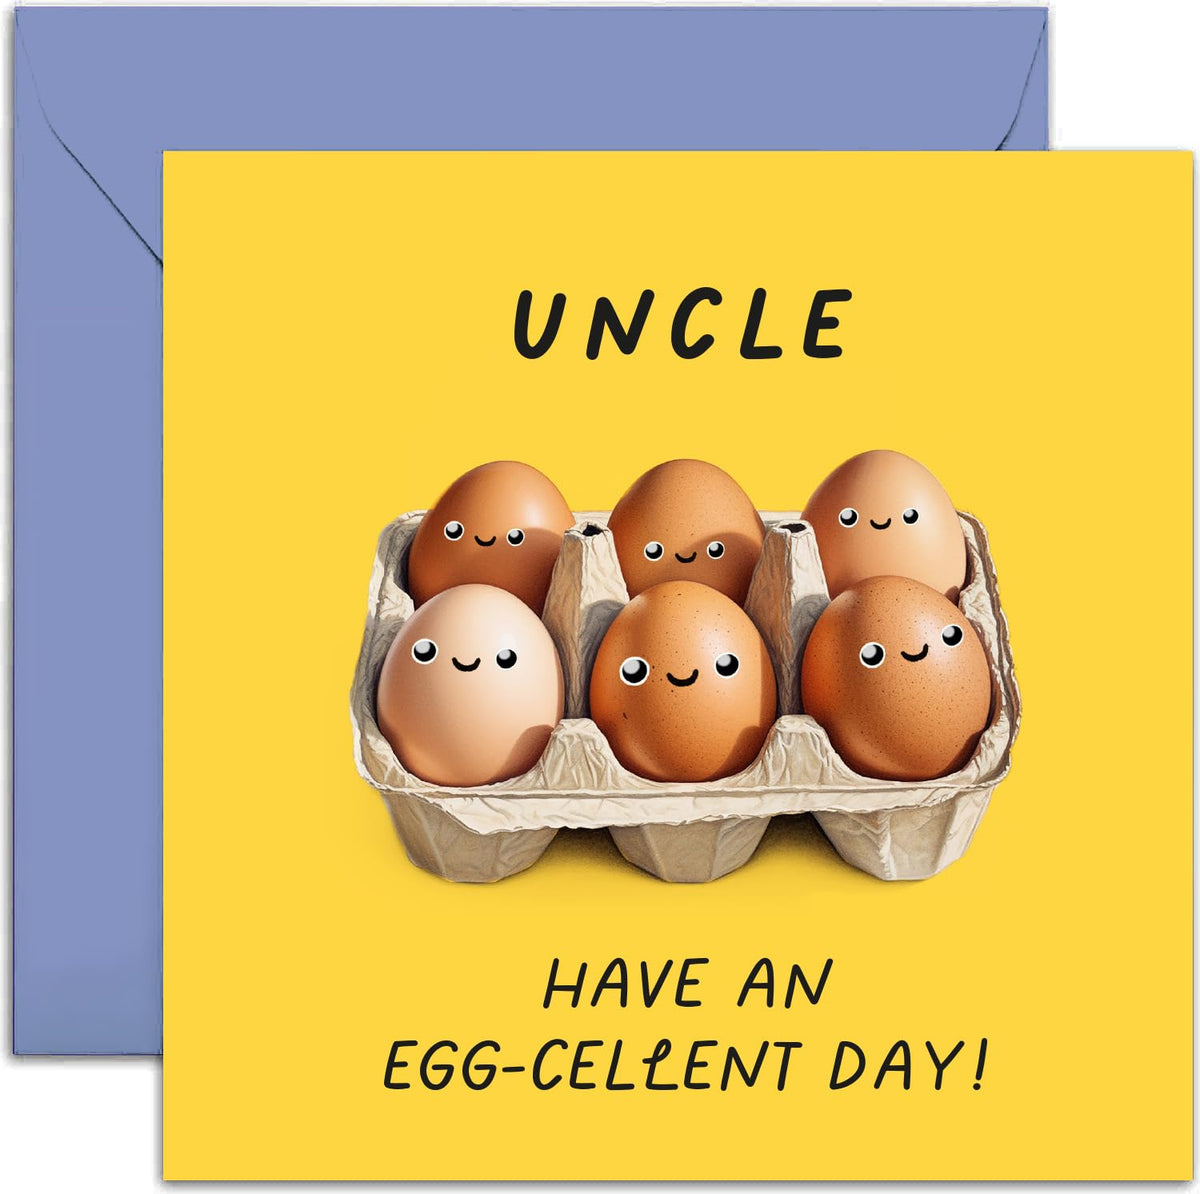 Old English Co. Fun Birthday Cards for Men and Women - Egg-cellent Birthday Card for Uncle - Congratulations Card for Him or Her - Humorous Birthday Card for Family   Blank Inside with Envelope